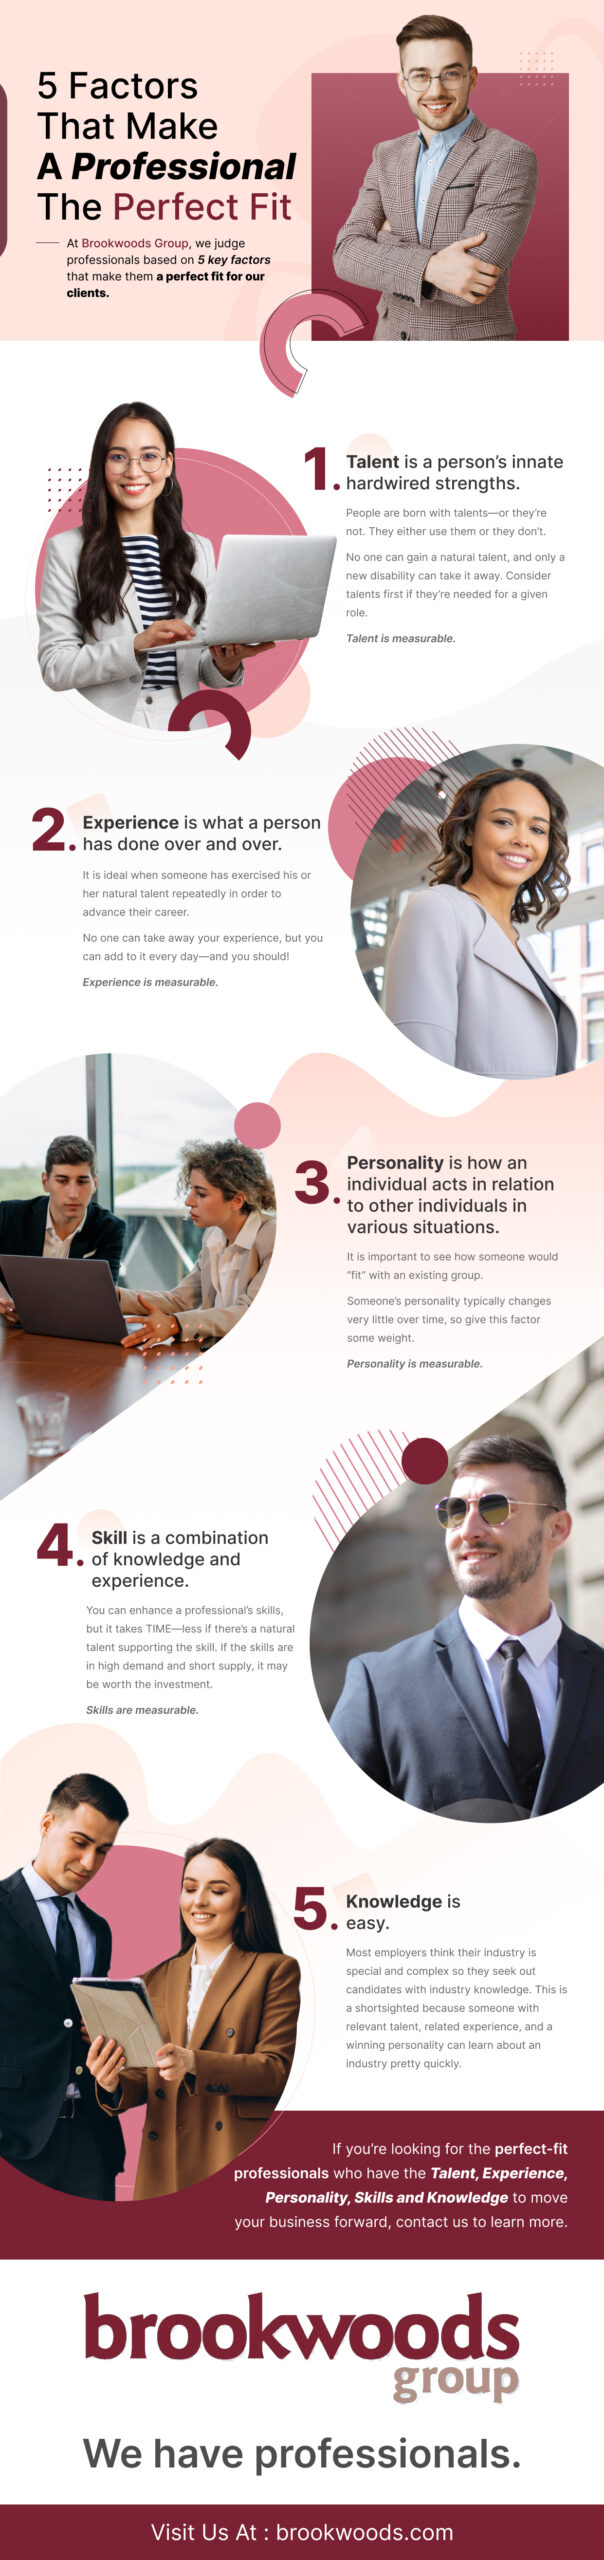 5 Factors That Make A Professional The Perfect Fit infographic